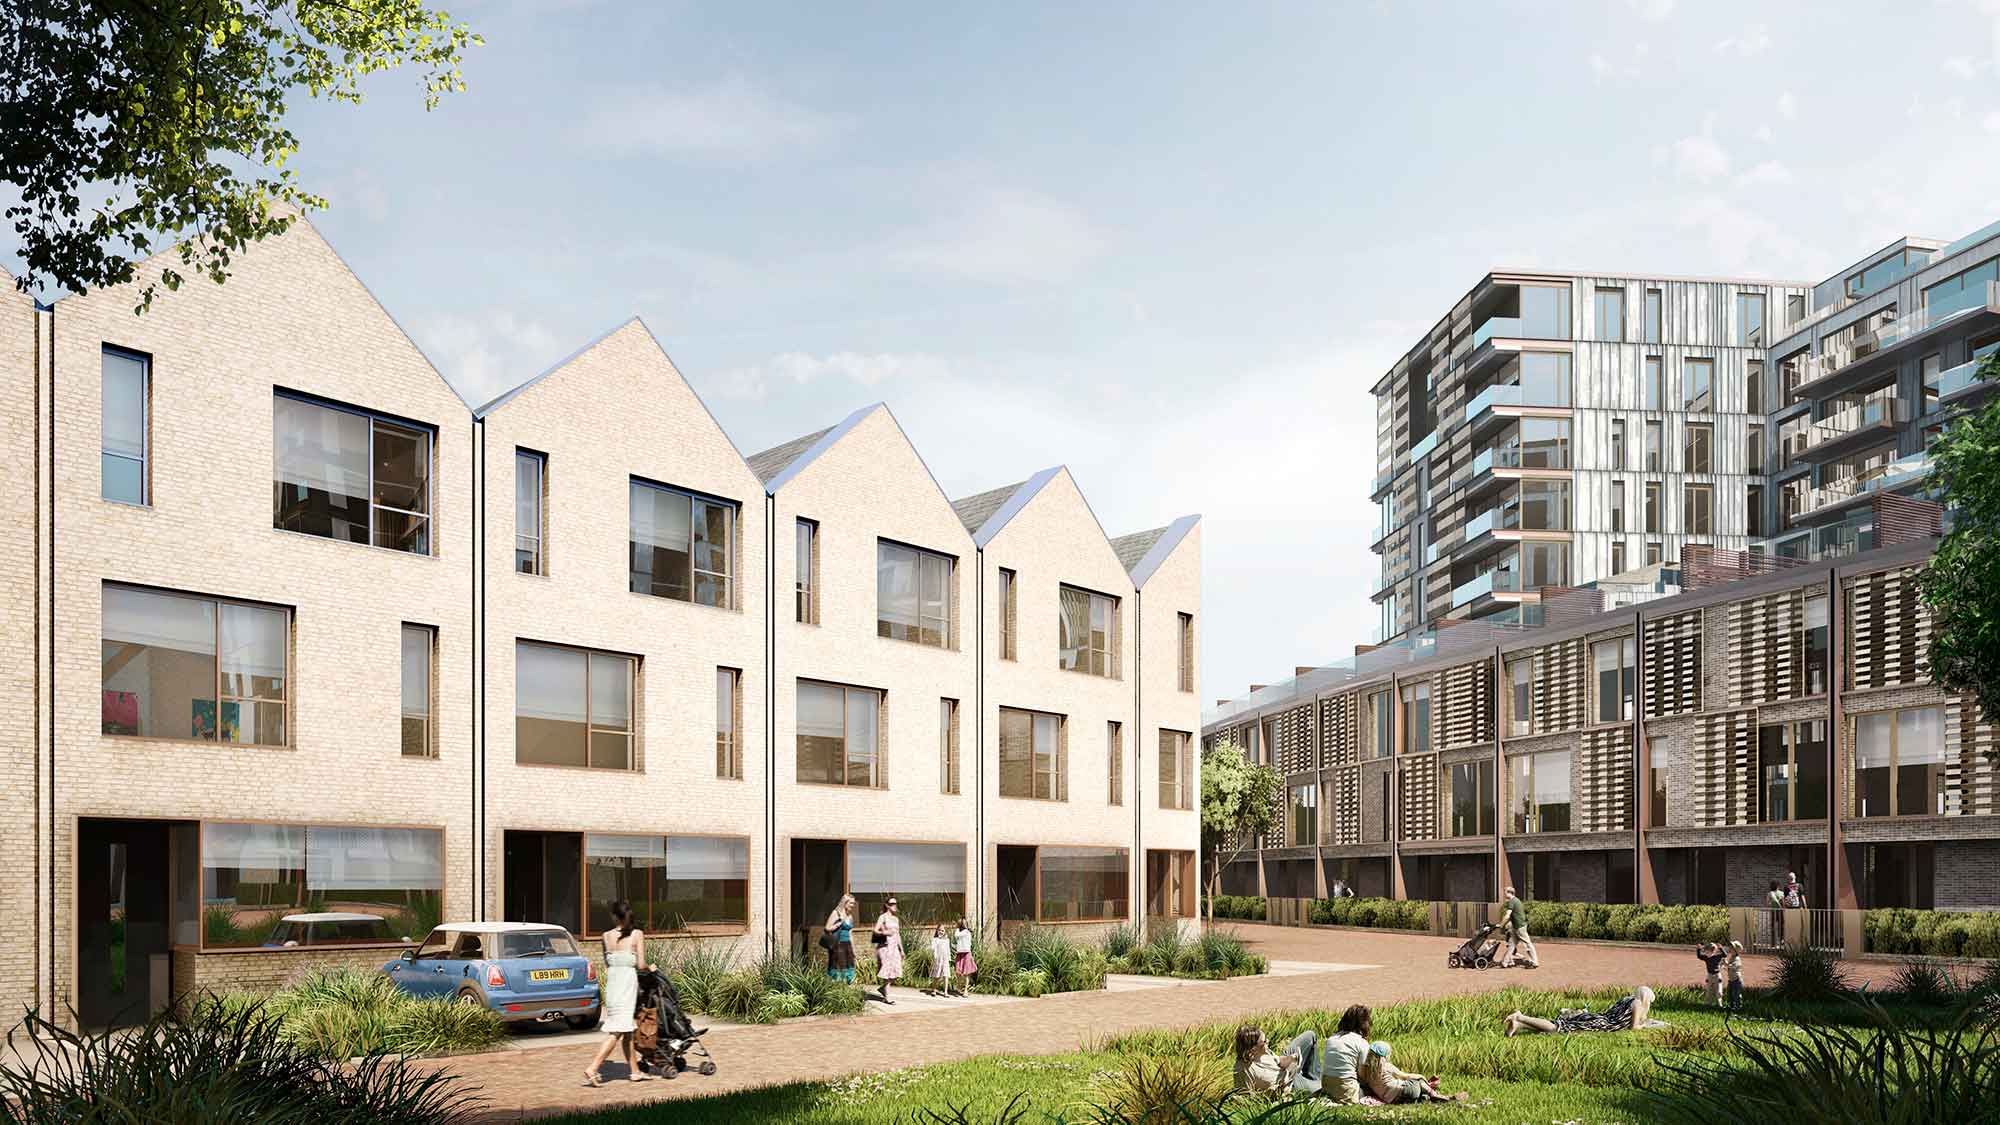 Design vision of the 432 new homes 